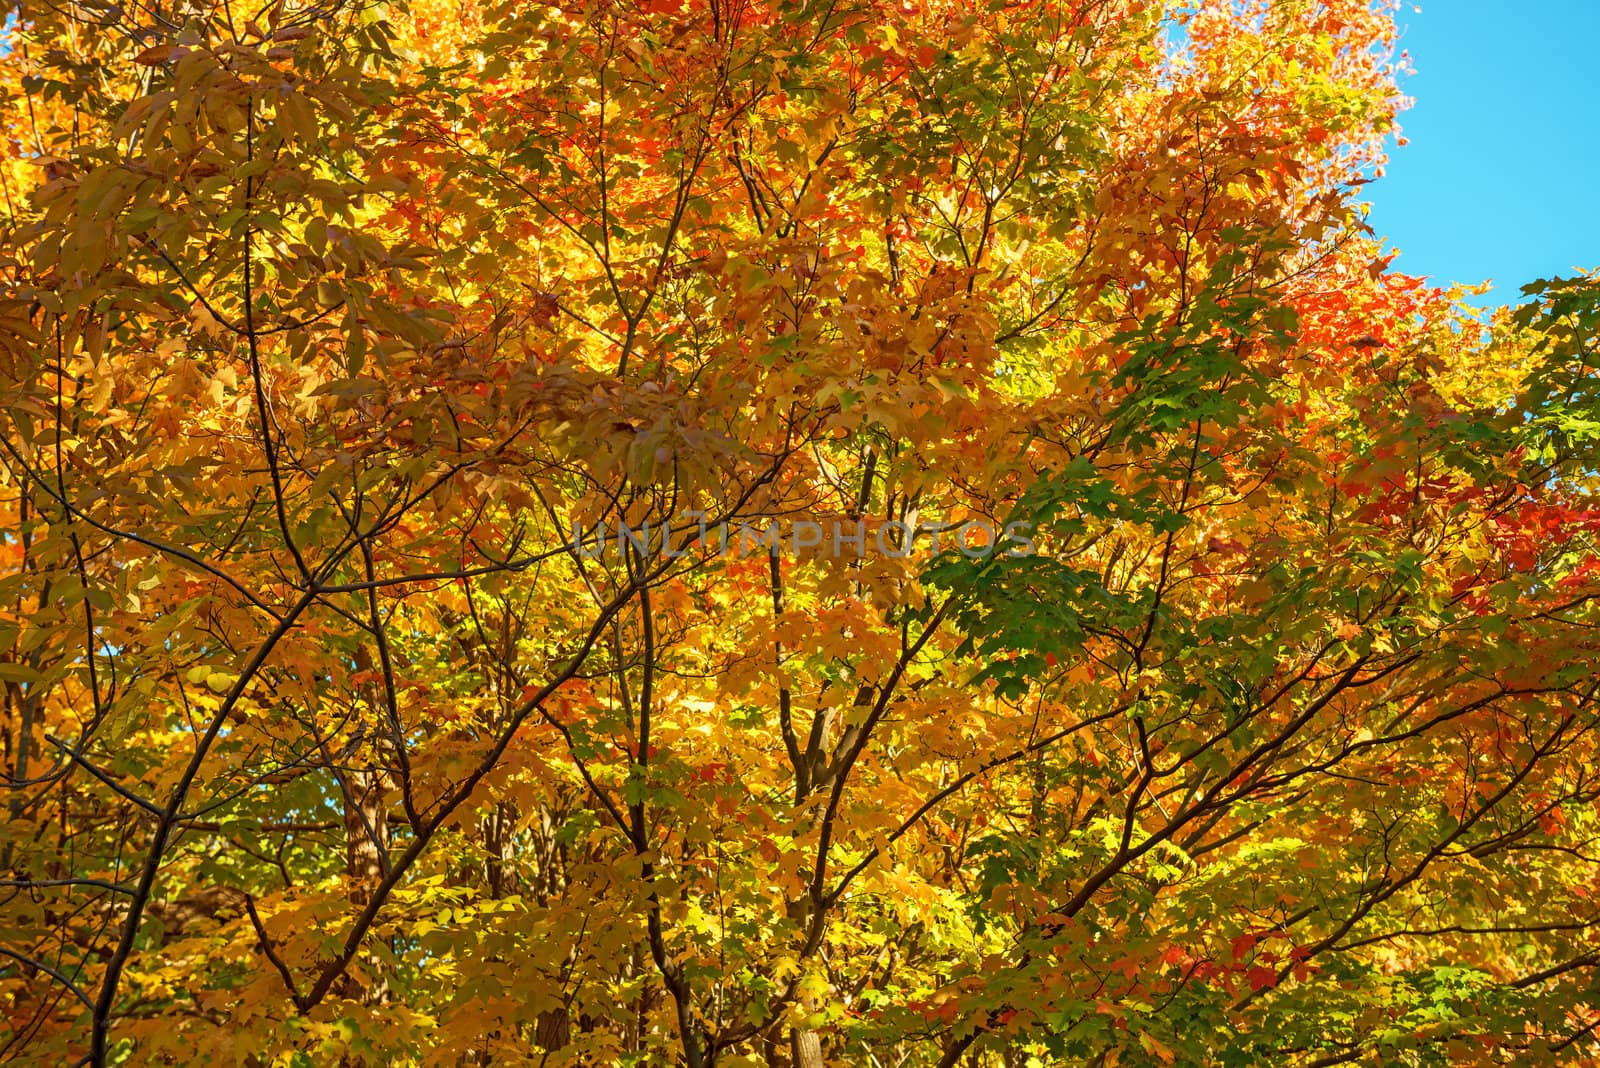 Vibrant color of Leaves on tree in the fall,  Milton, Ontario, Canada
